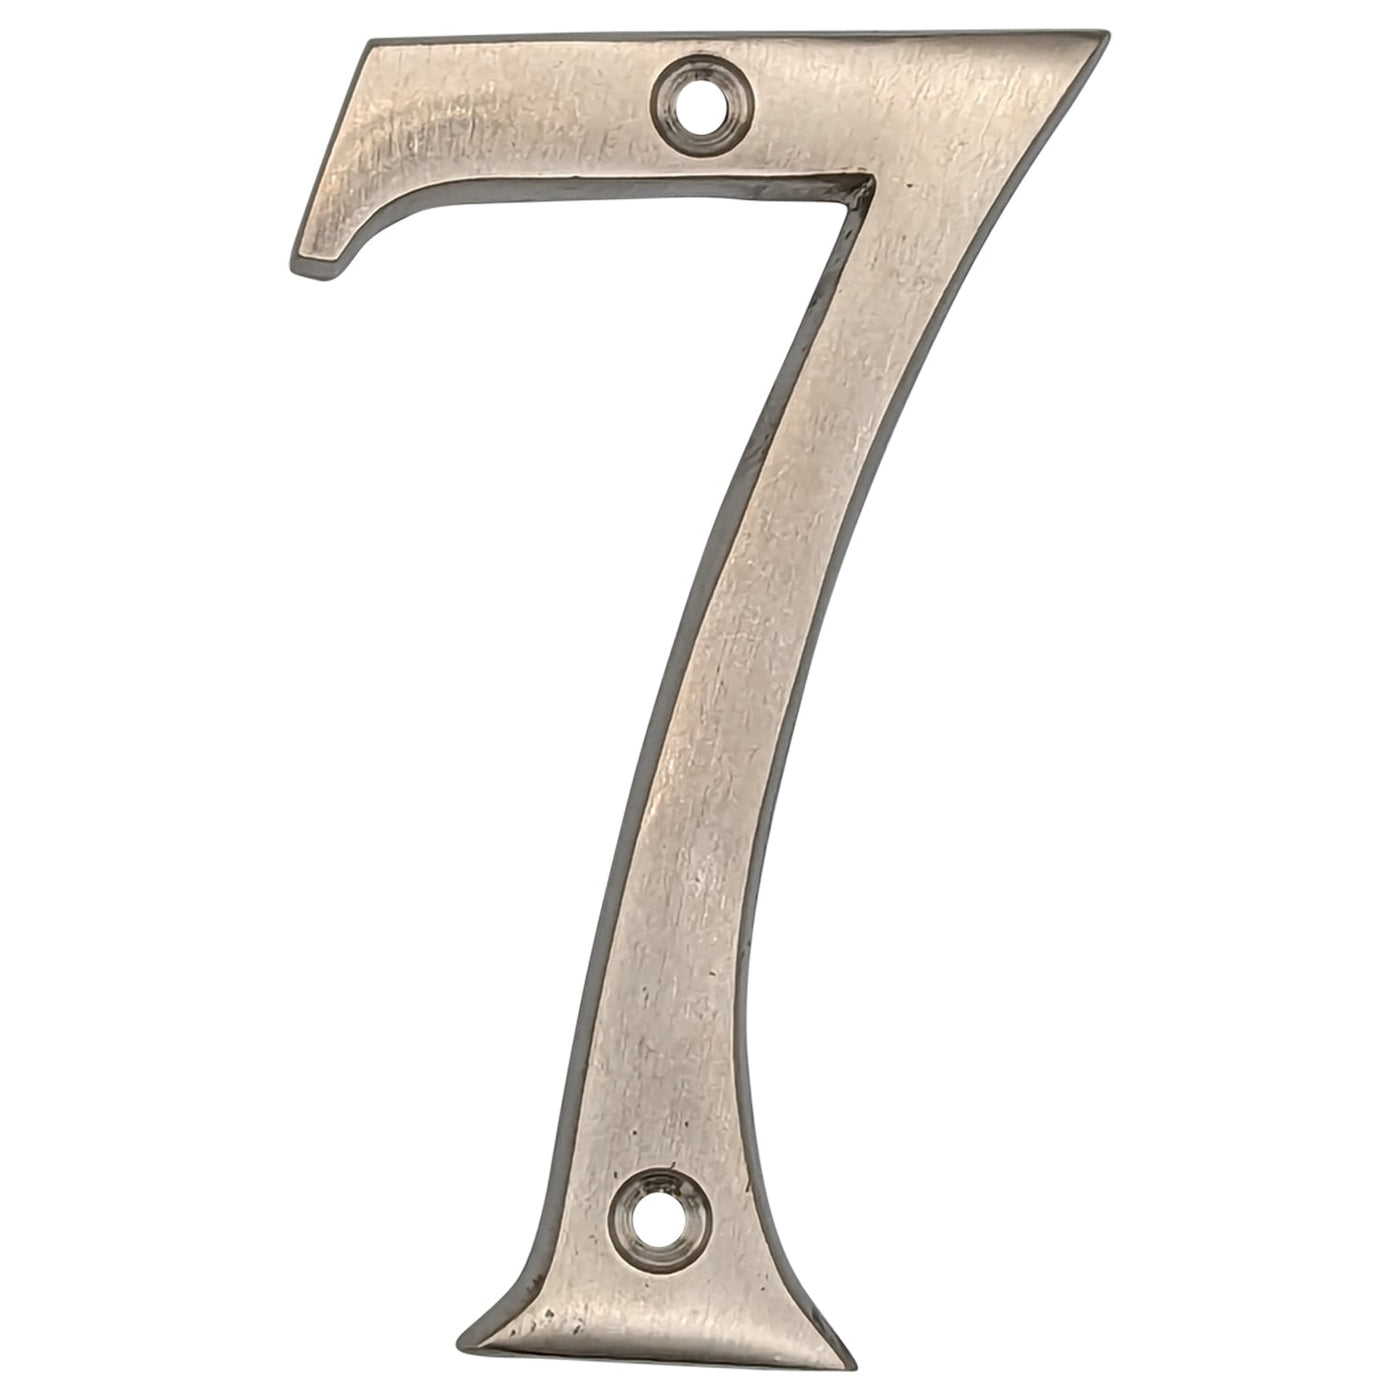 4 Inch Tall House Number 7